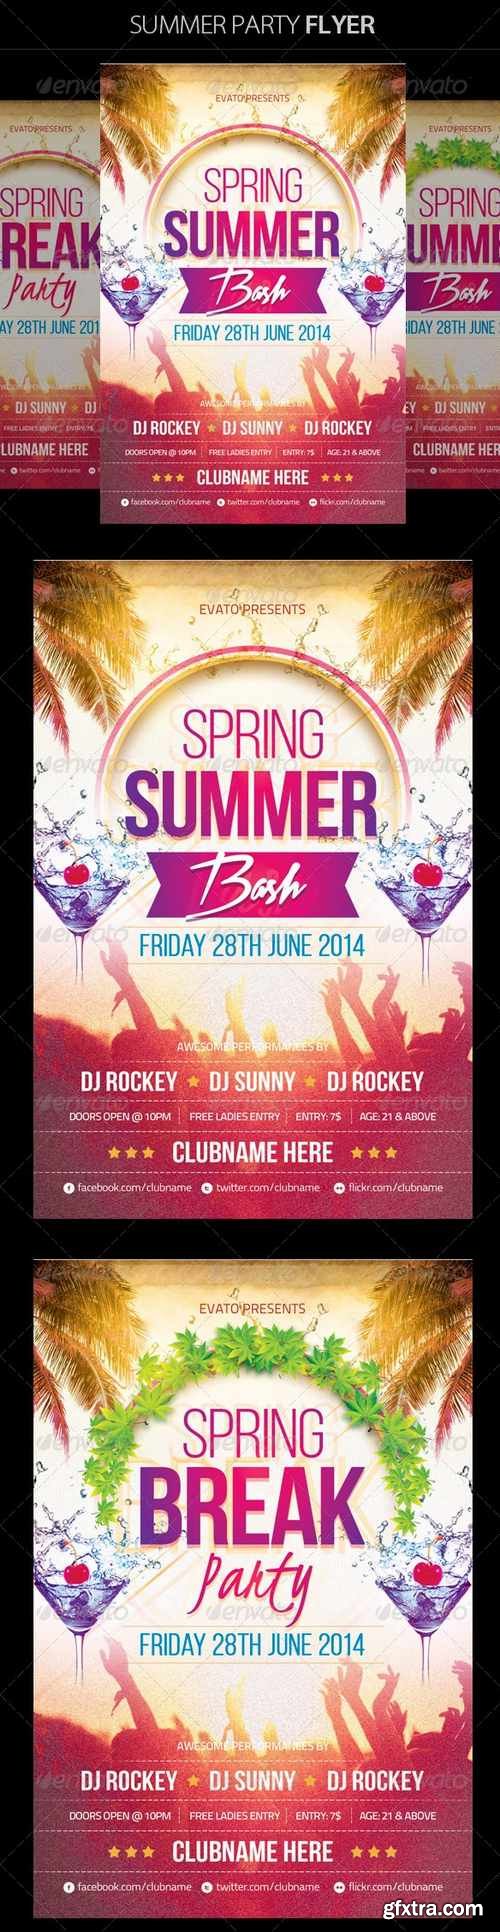 Summer / Spring Party Flyer - Graphicriver 7721989